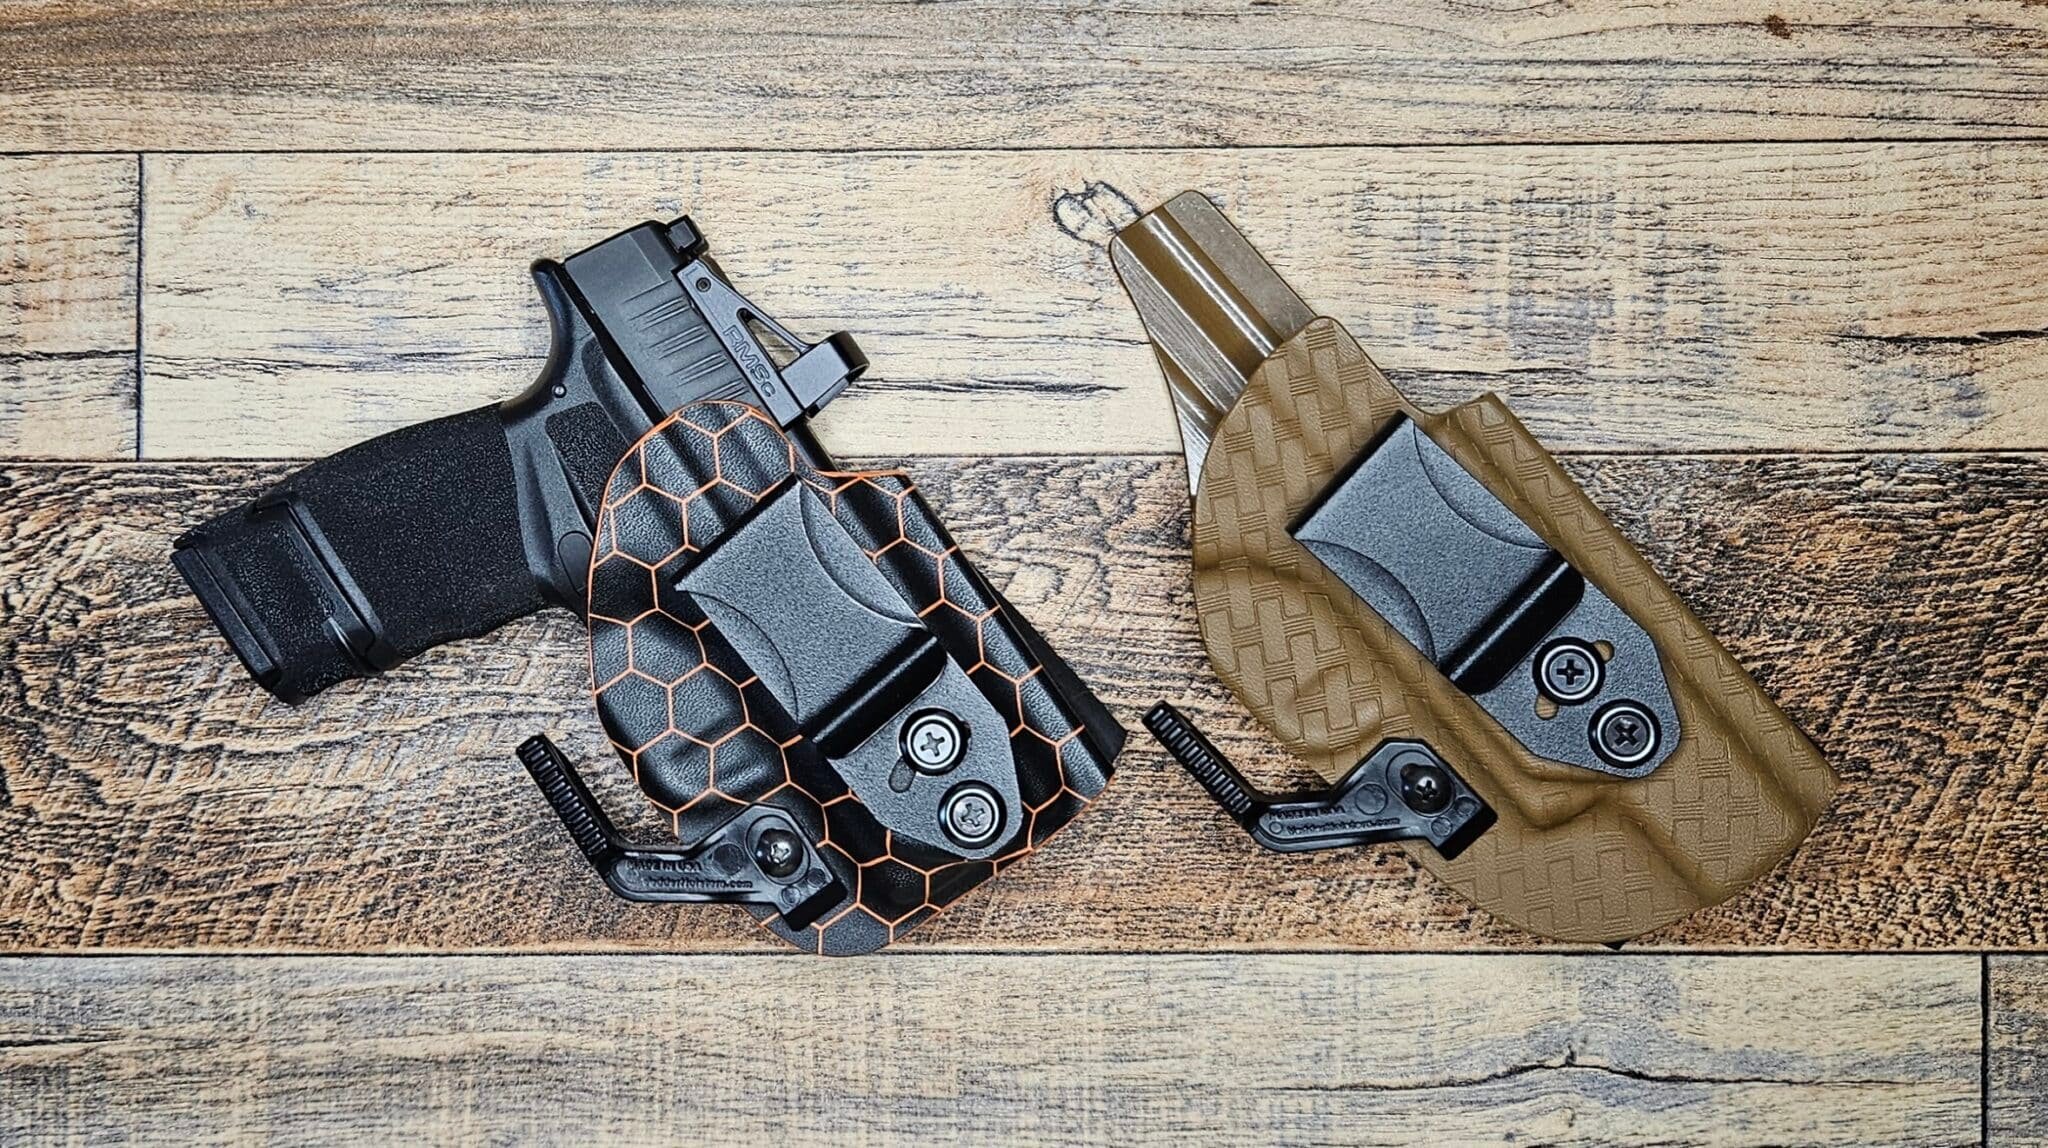 Holster claw and foam wedge